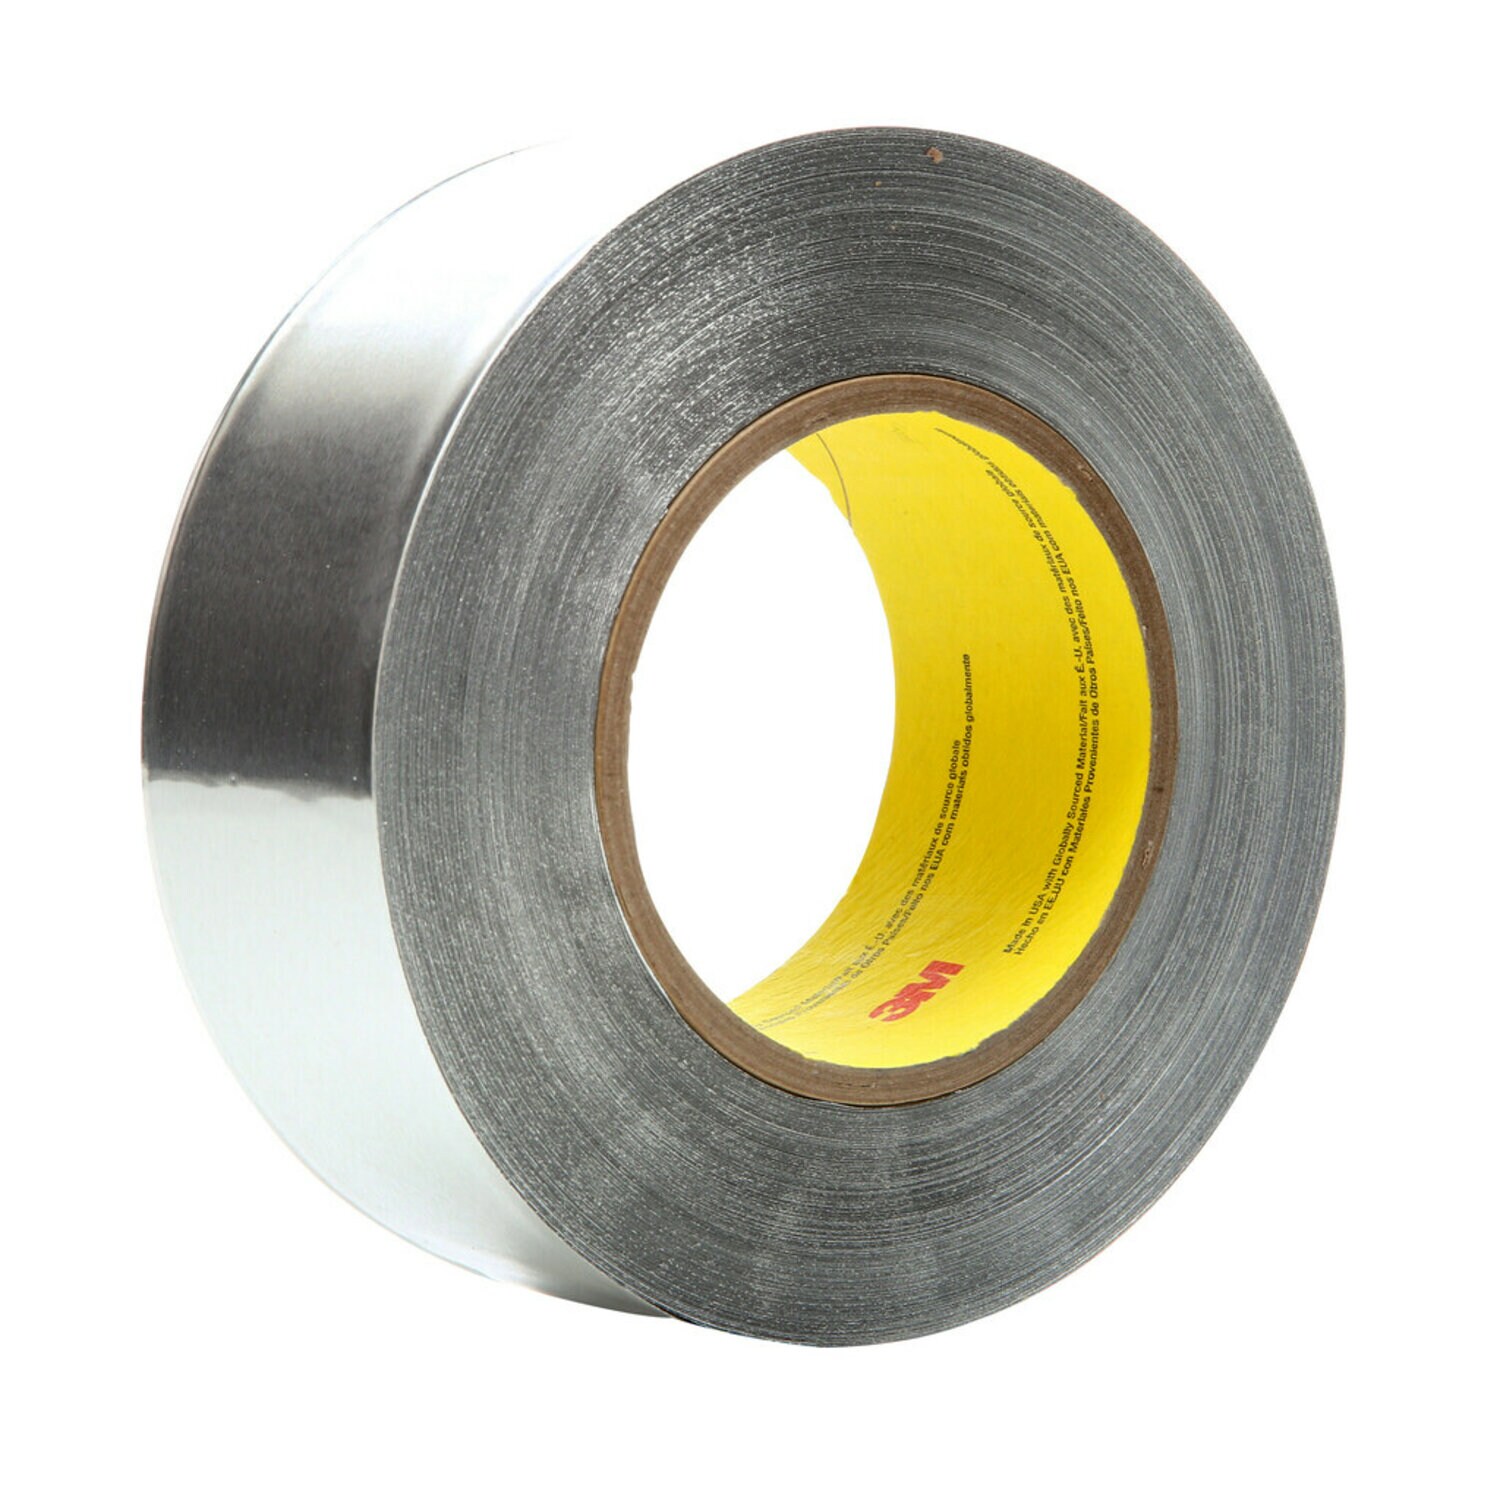 Conductive Tapes, Adhesive Tabs, Silver, Aluminum, Carbon, Copper